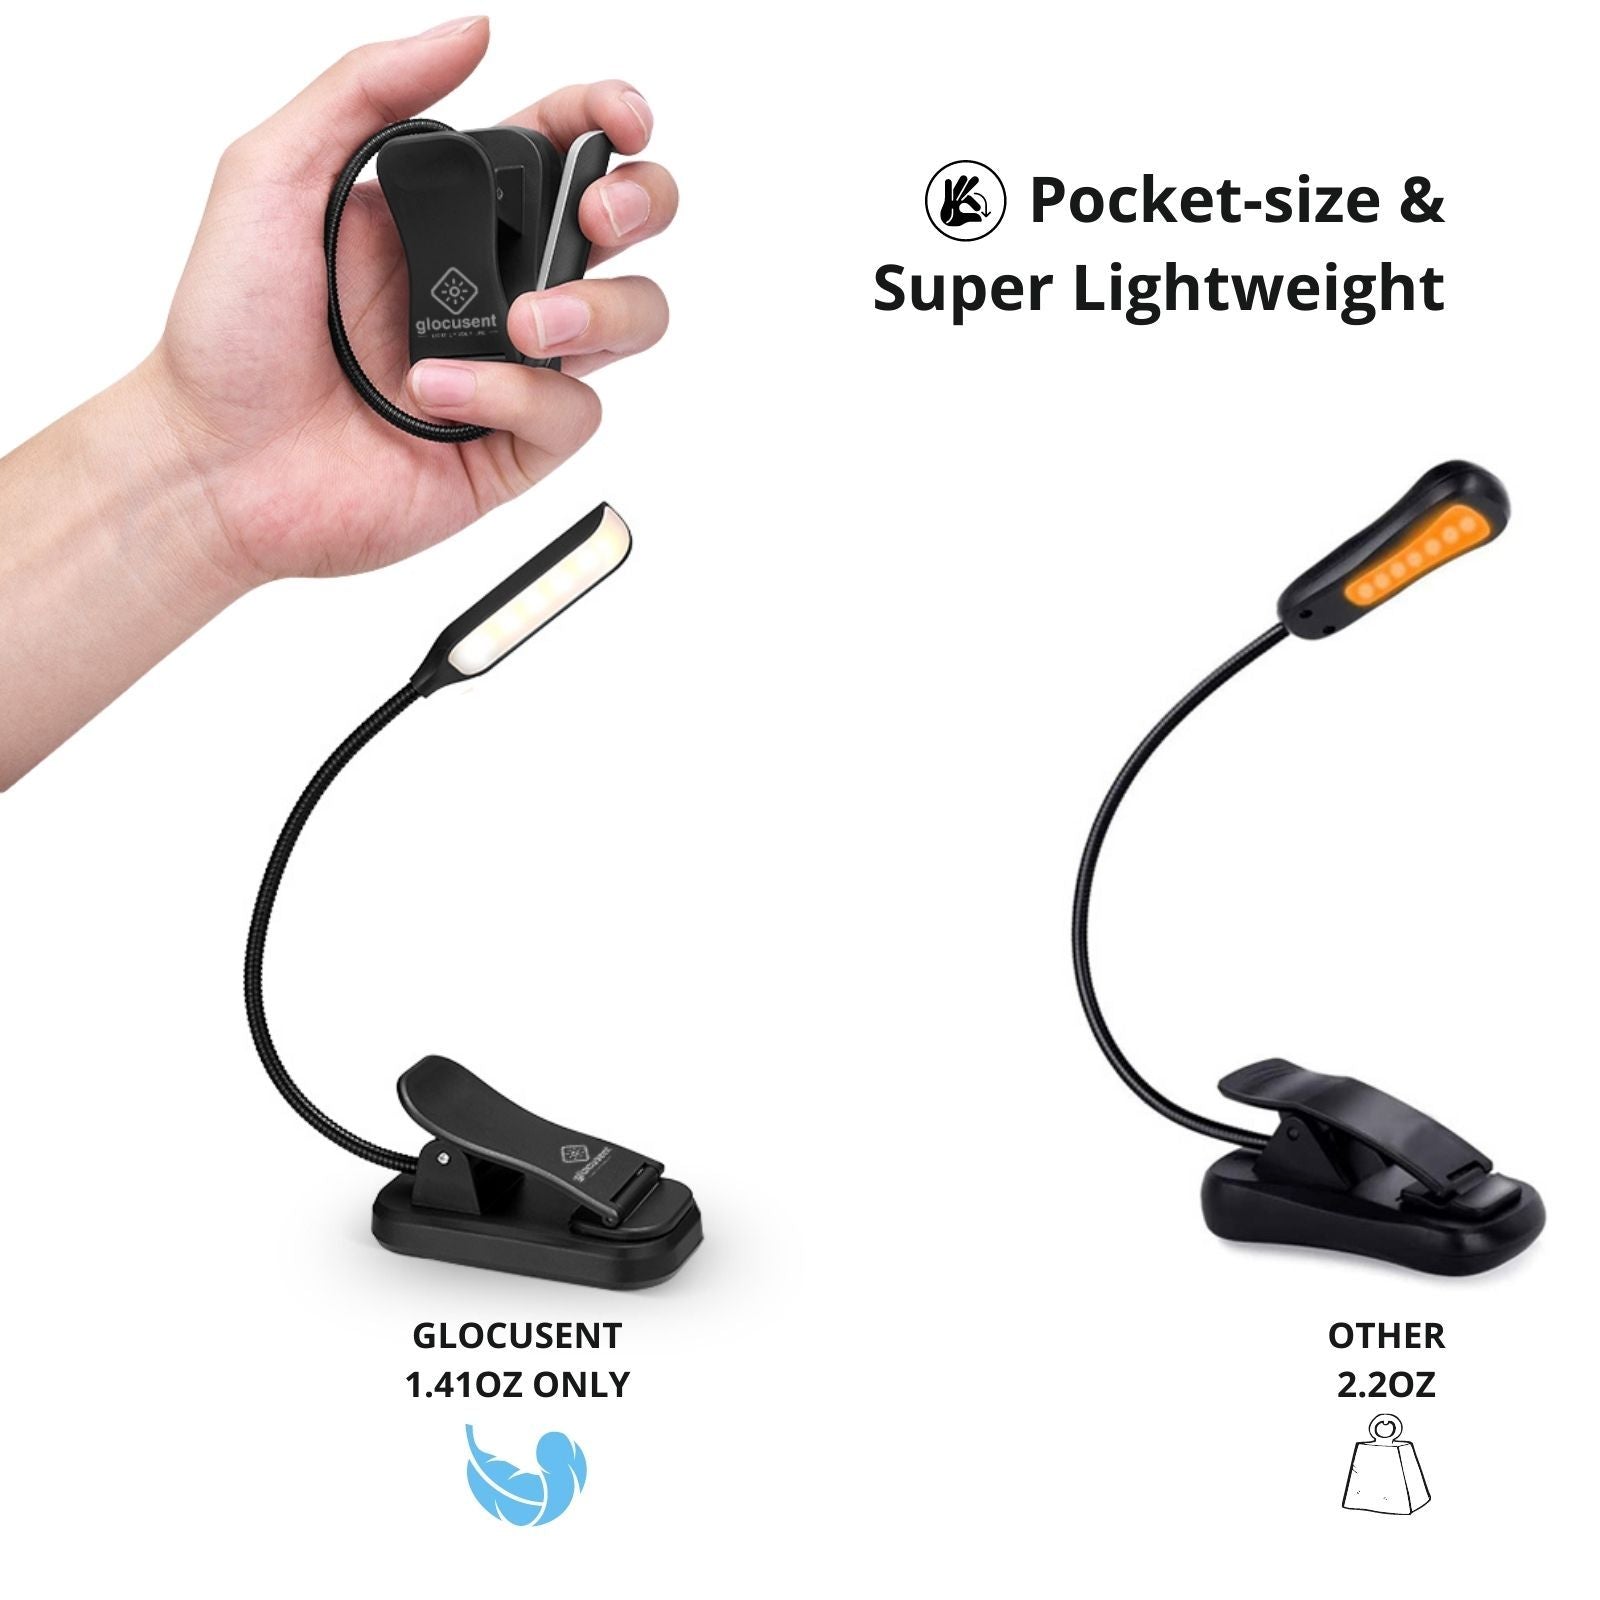 the best pocket-size book light for reading